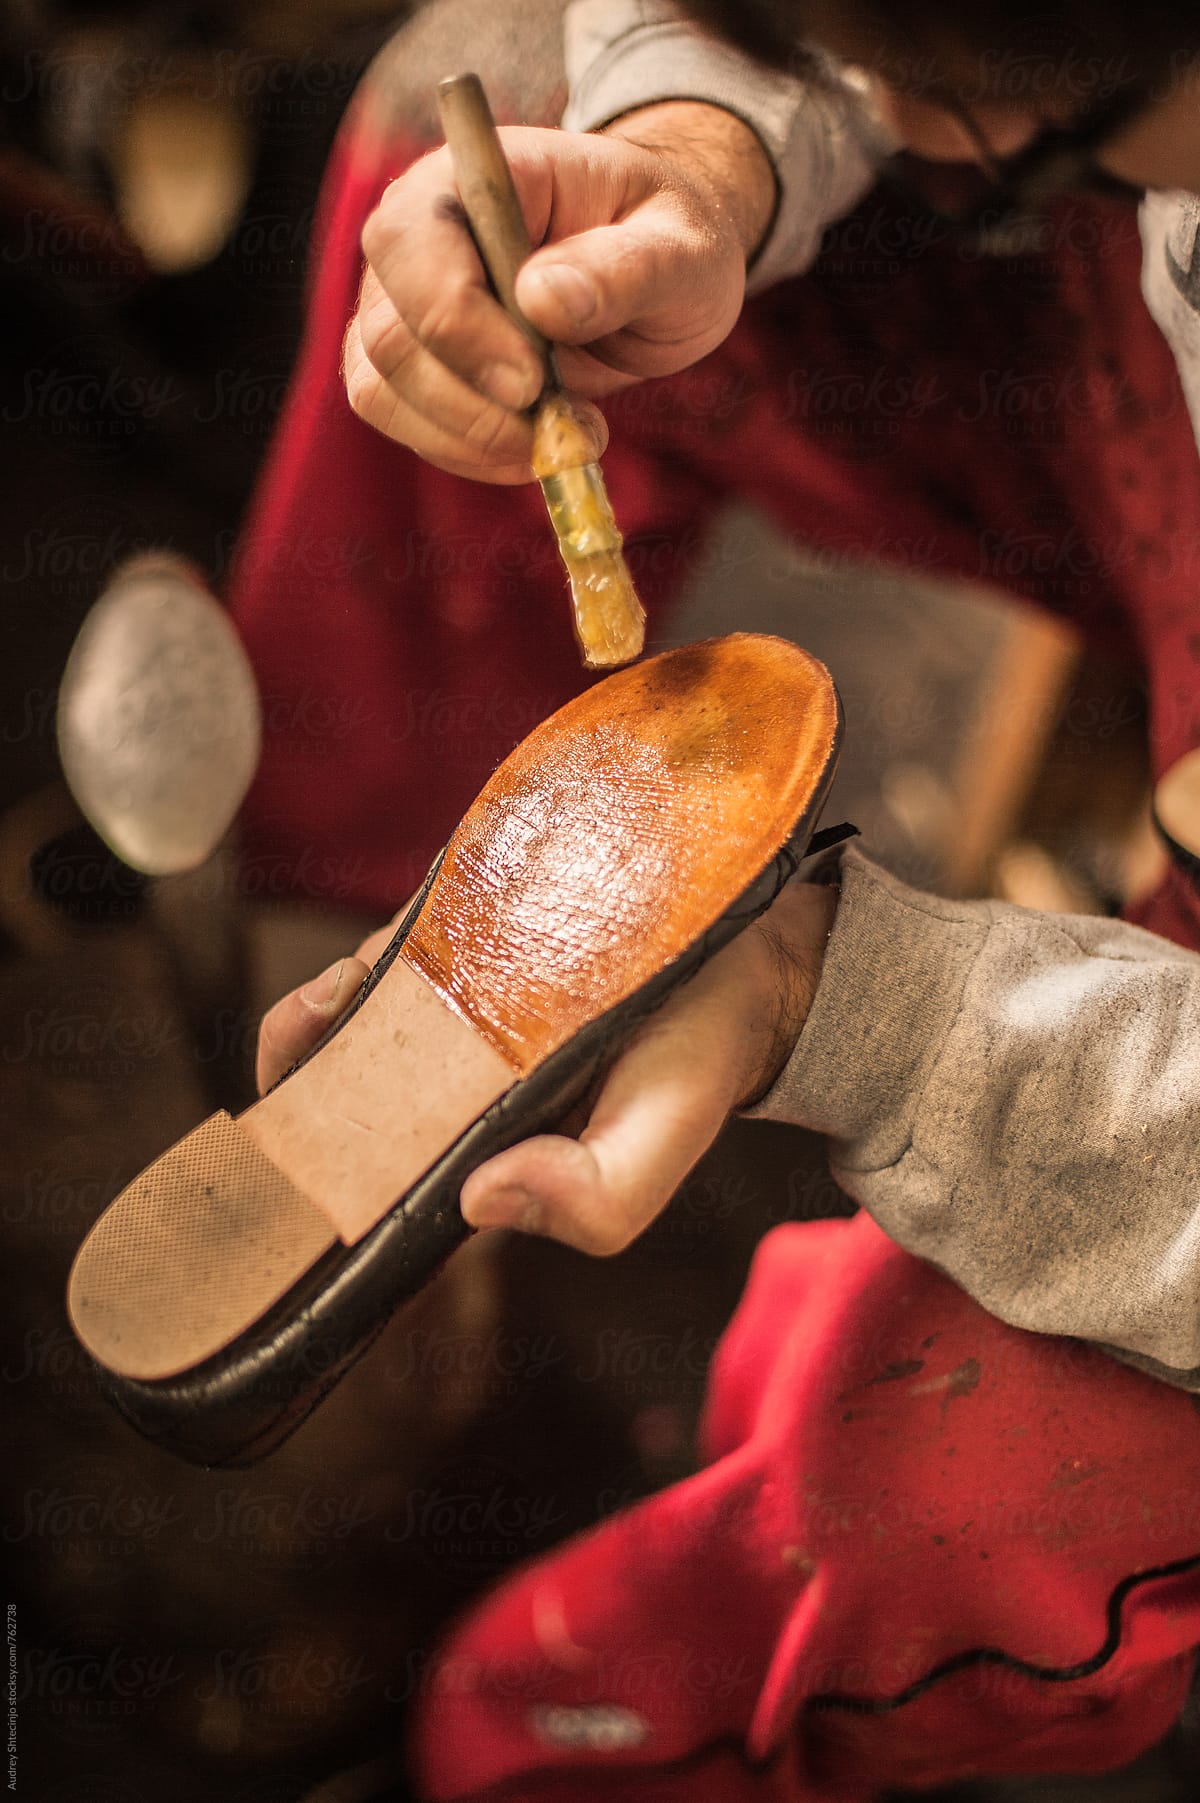 Close up/detail of shoemaker putting glue on shoes.